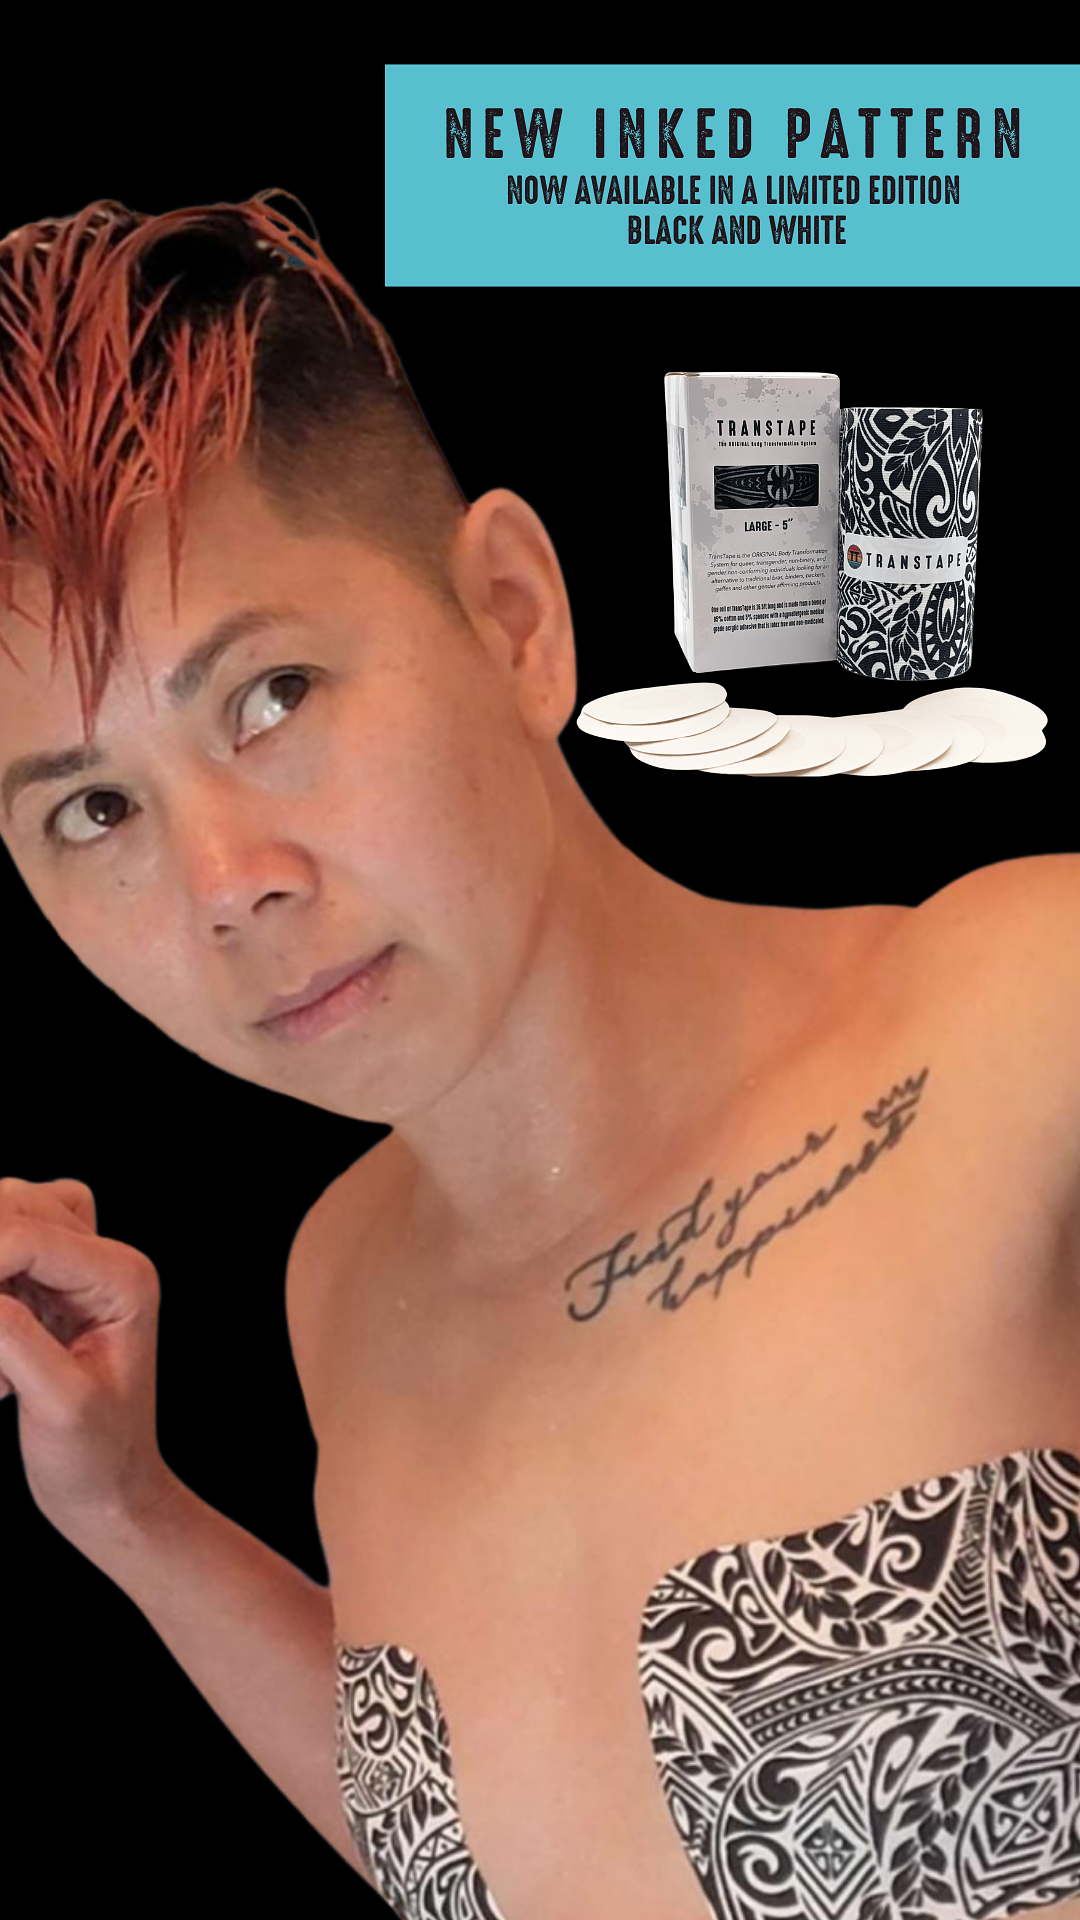 NEW Inked Pattern, Better Skin Tones + Higher Quality Removal Oil -  Transtape